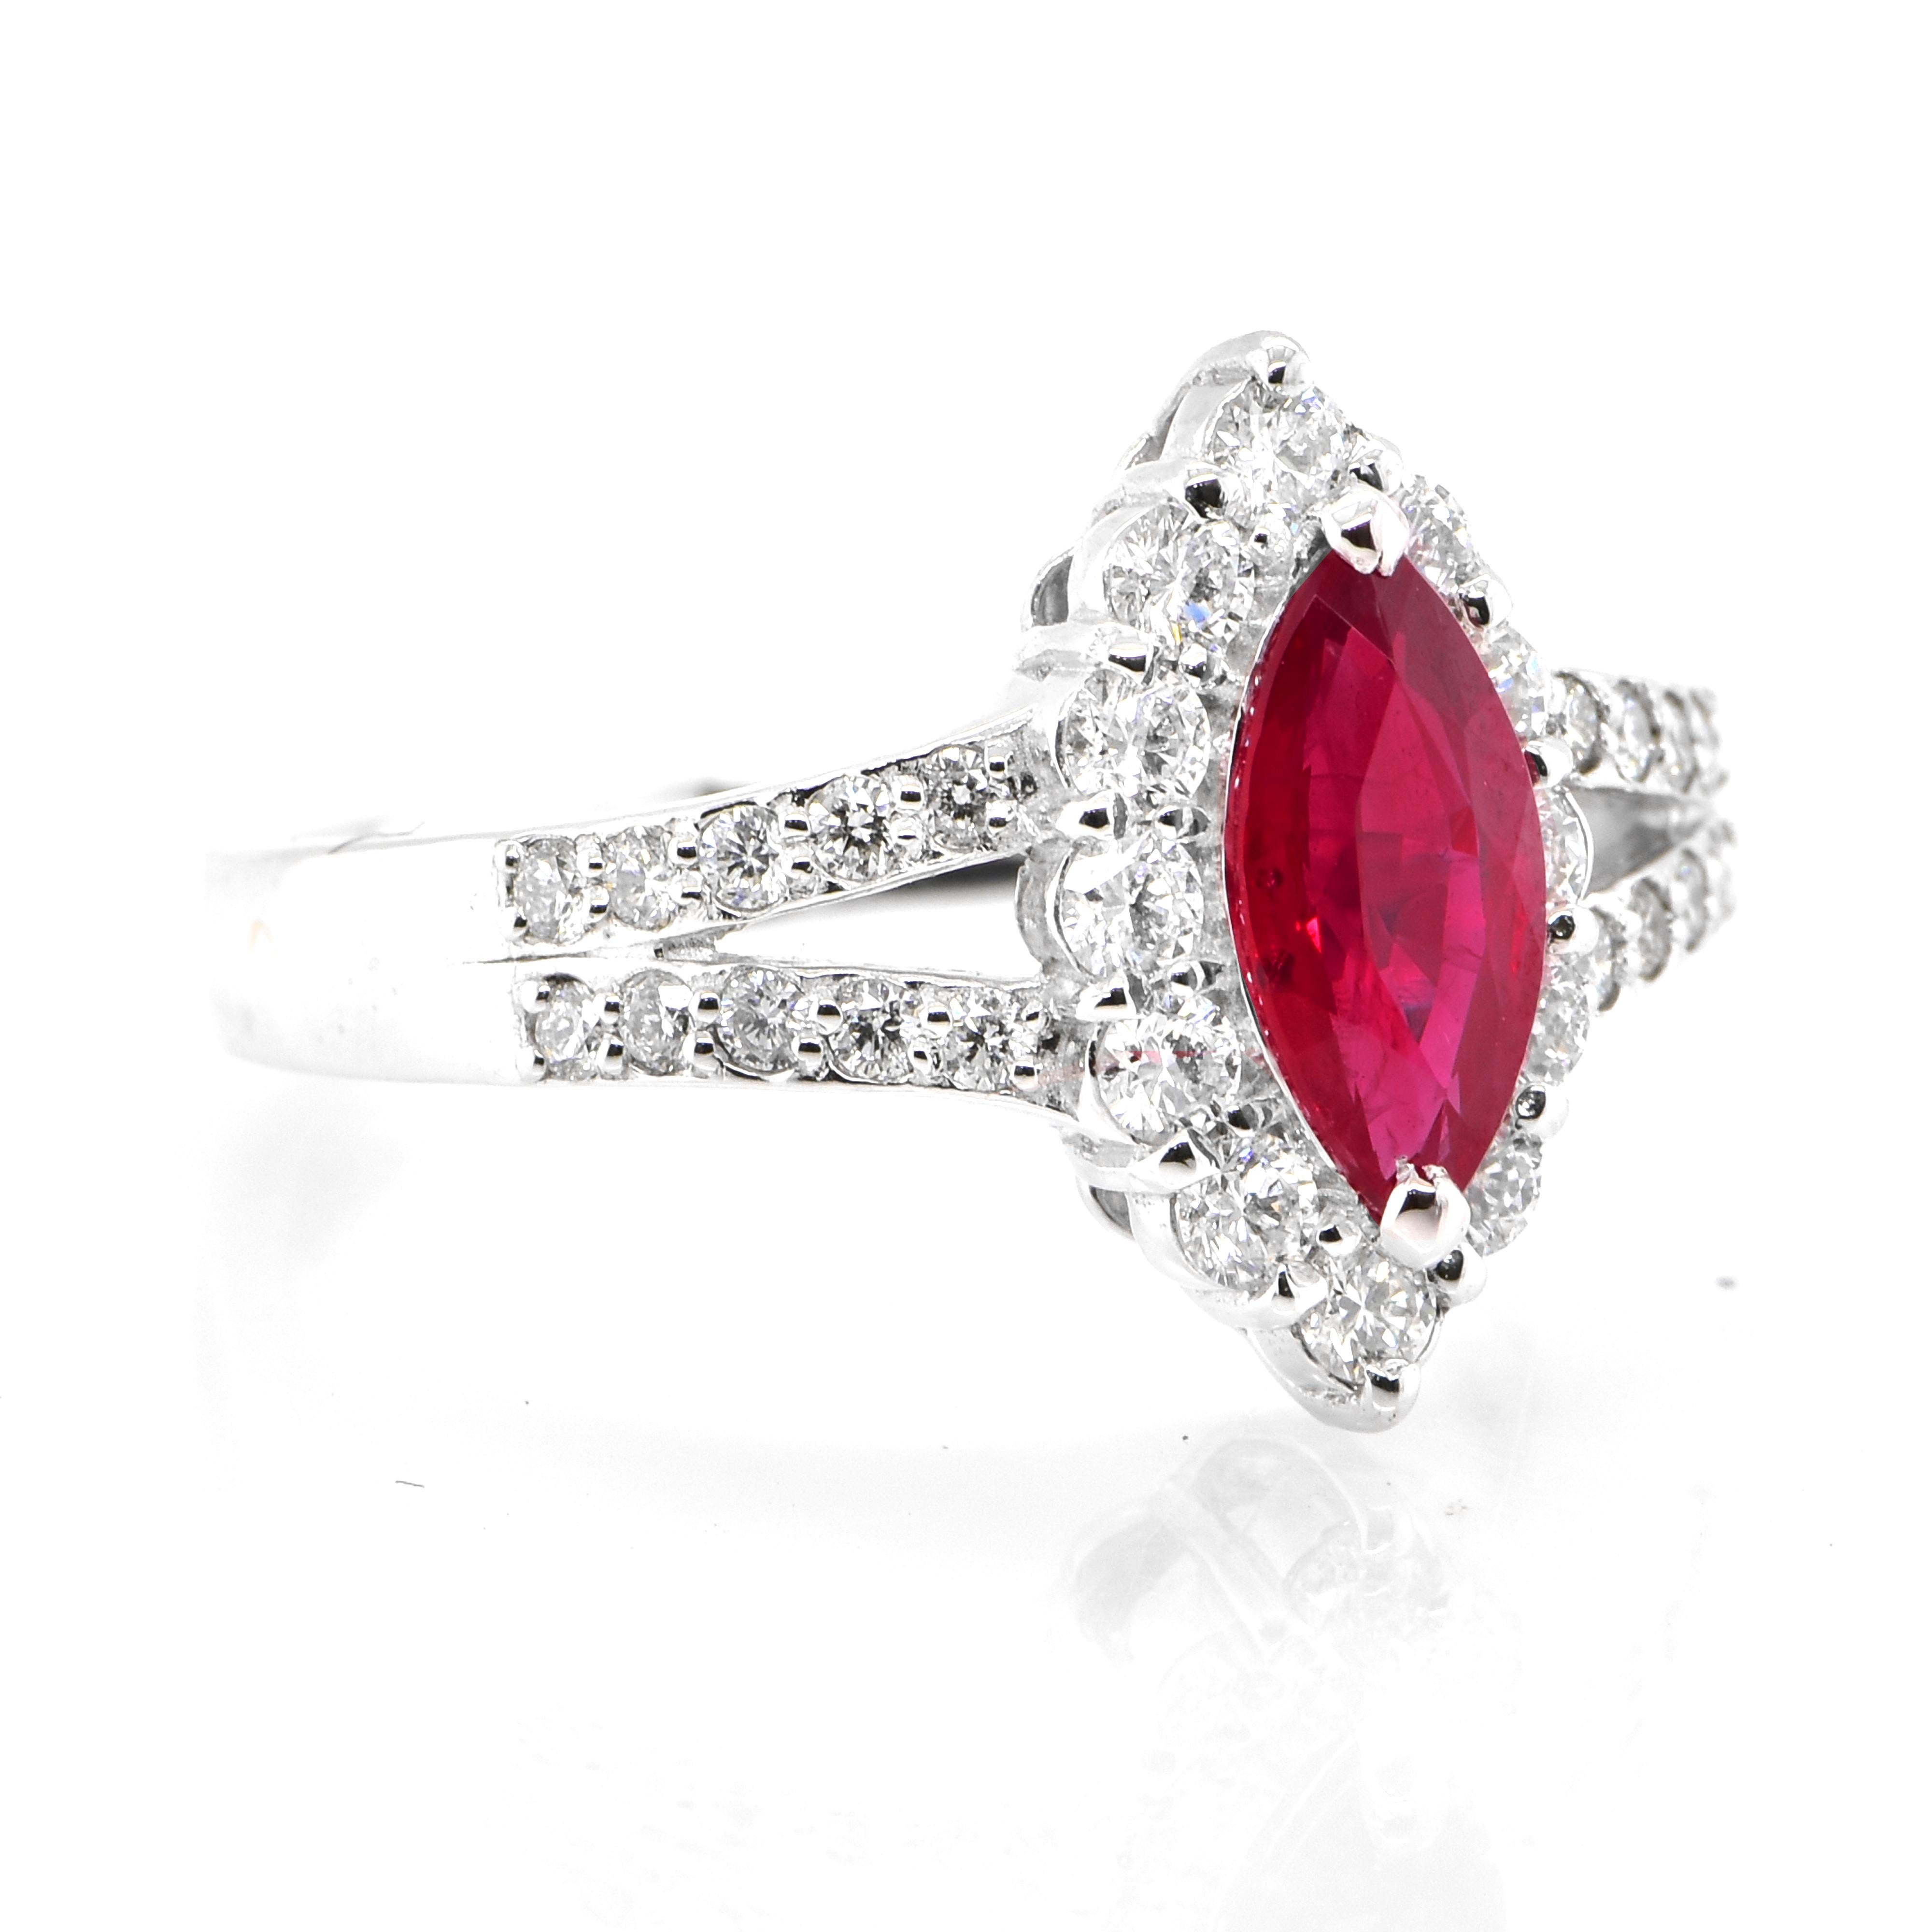 Modern GIA Certified 1.02 Carat Burmese, Pigeon's Blood Color Ruby Ring set in Platinum For Sale